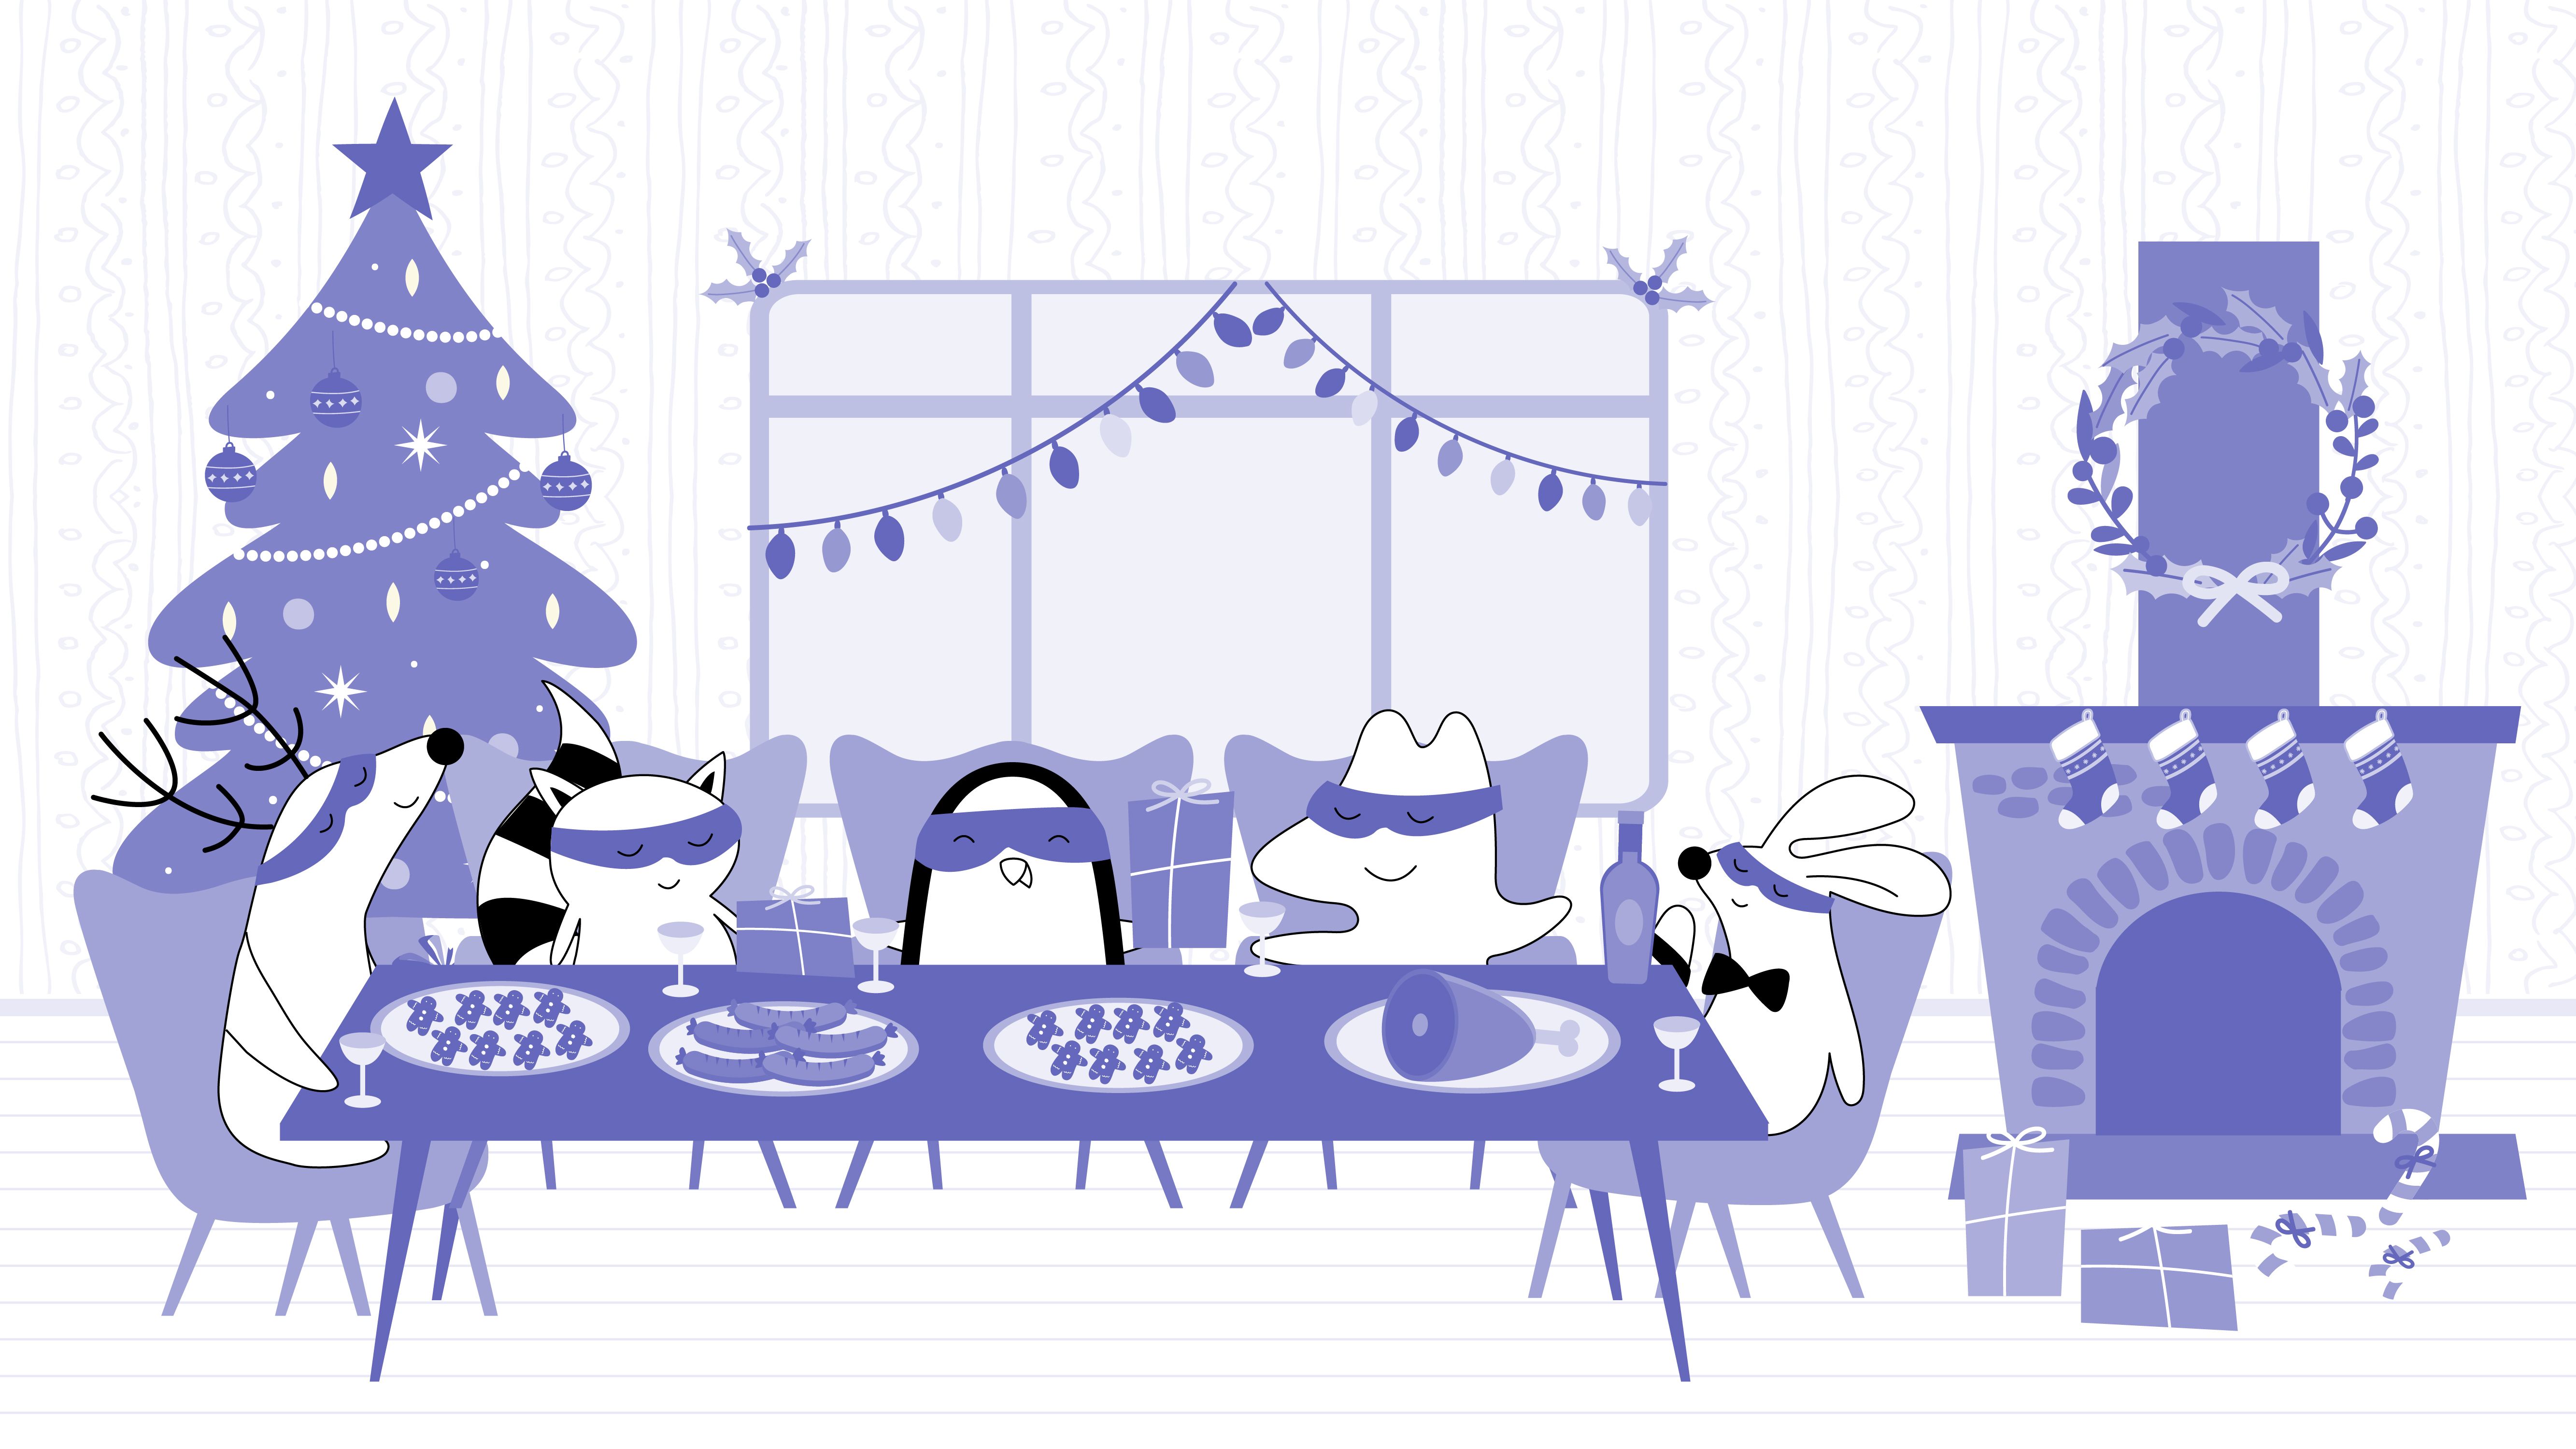 Soren, Iggy, Benji, and Pocky are toasting the New Year at a table full of food.